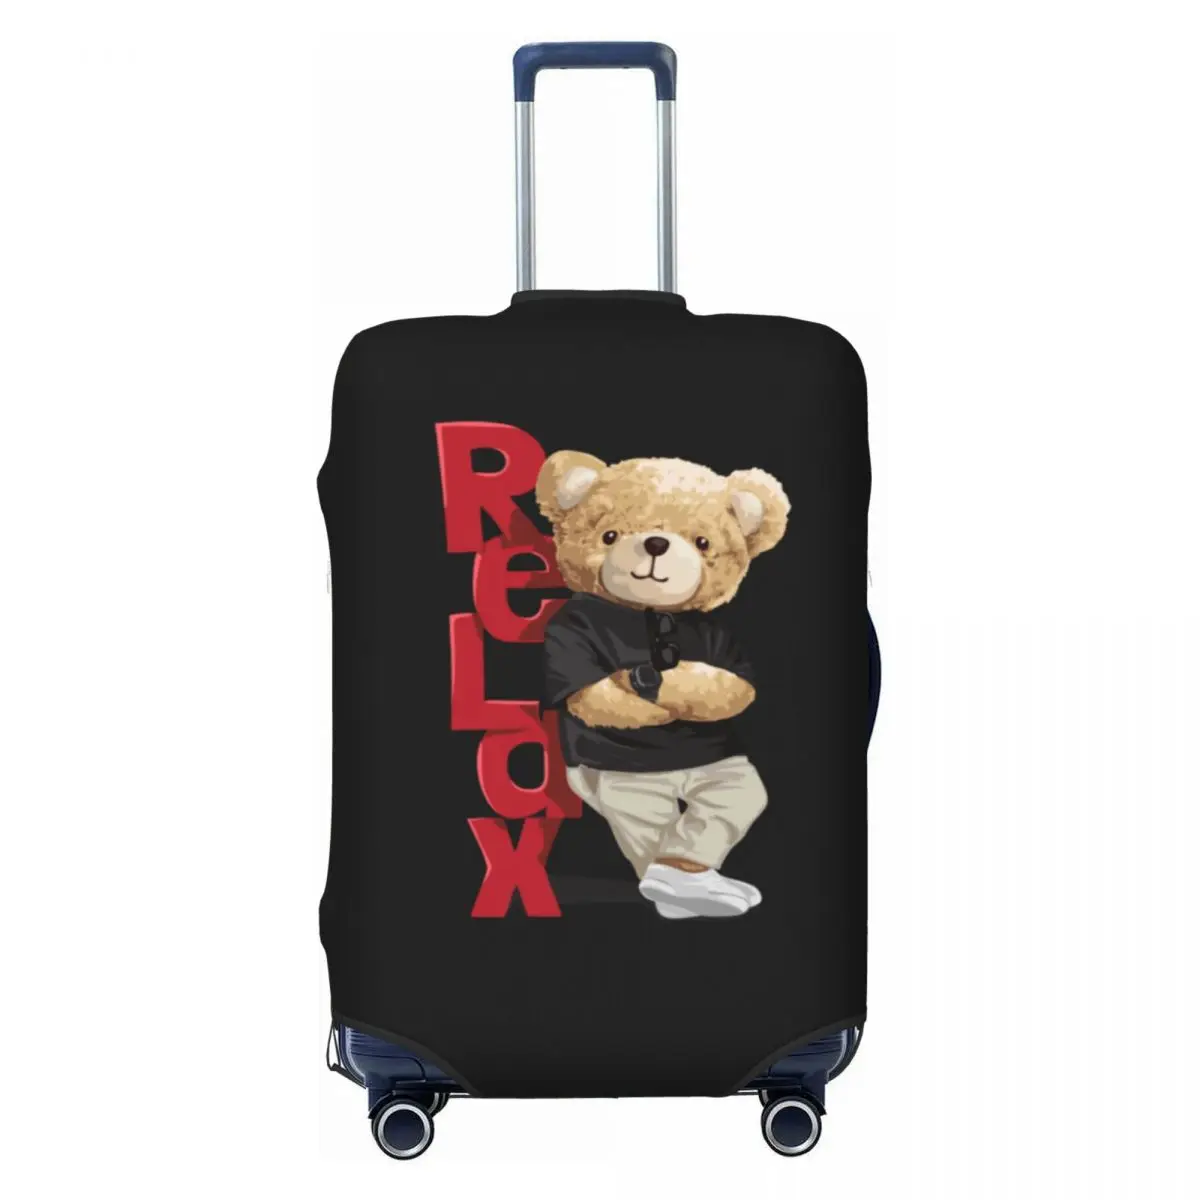 

Bear Doll Pattern Suitcase Cover Relax Cute Animal Cartoon Vacation Cruise Trip Strectch Luggage Supplies Protection